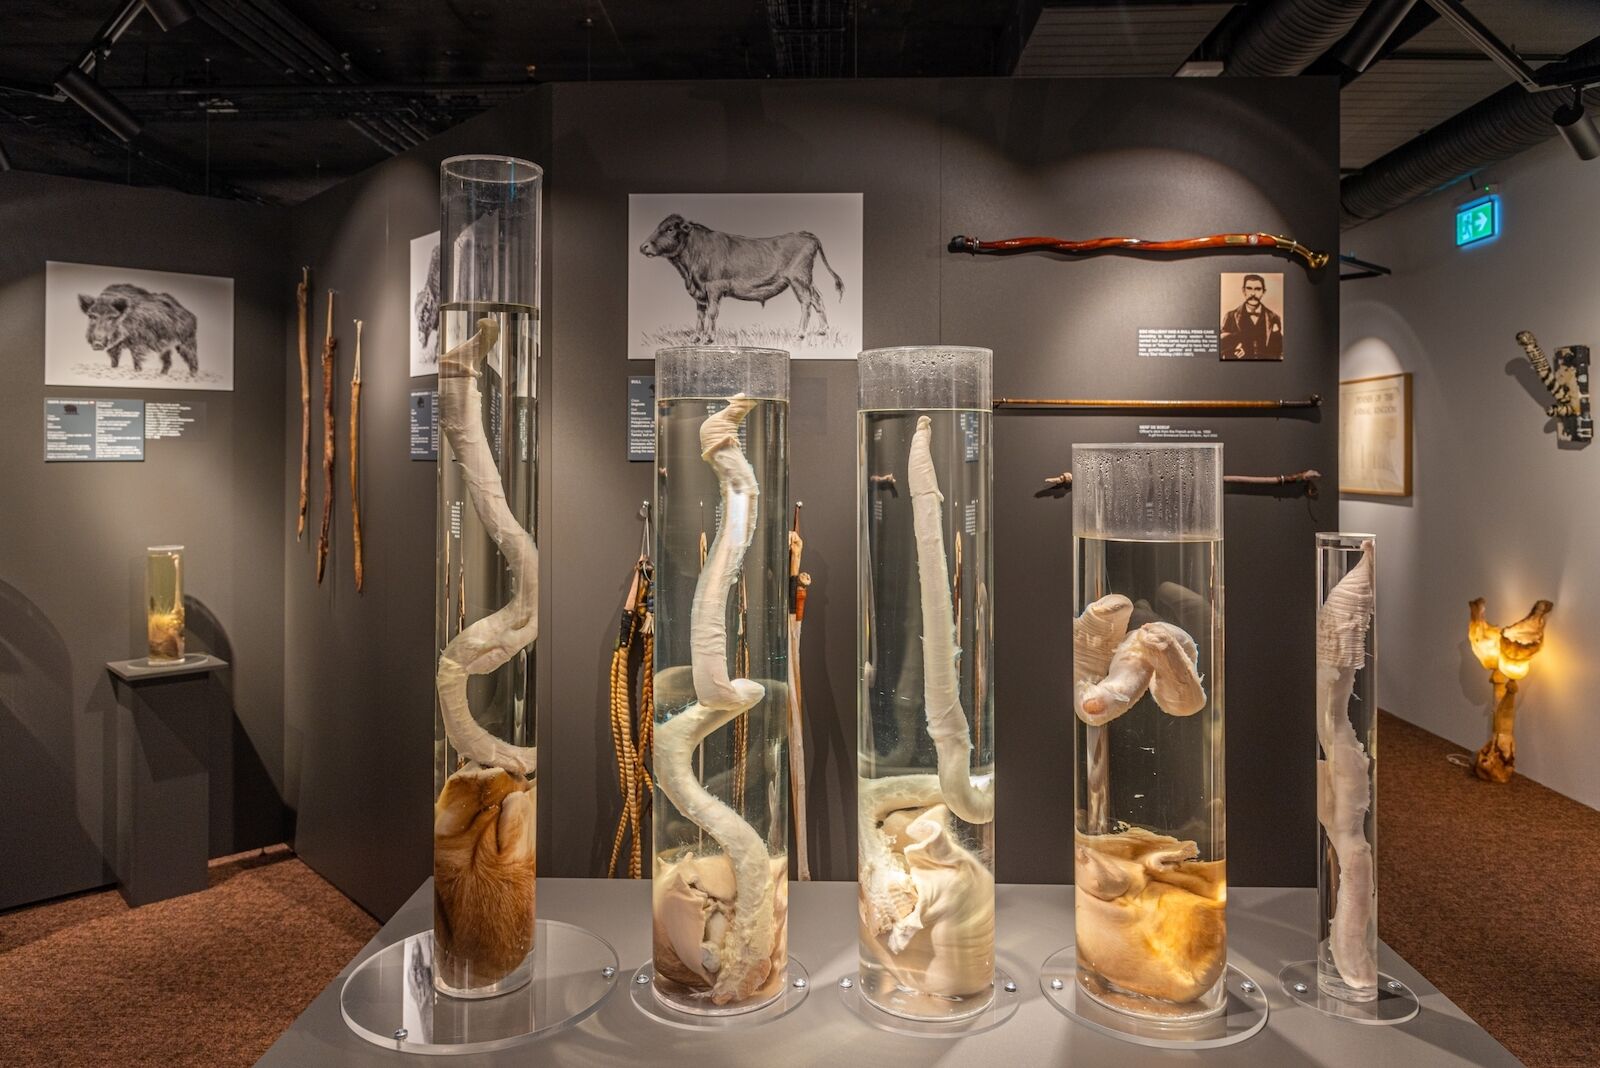 specimens of animal penises at the penis museum in Iceland